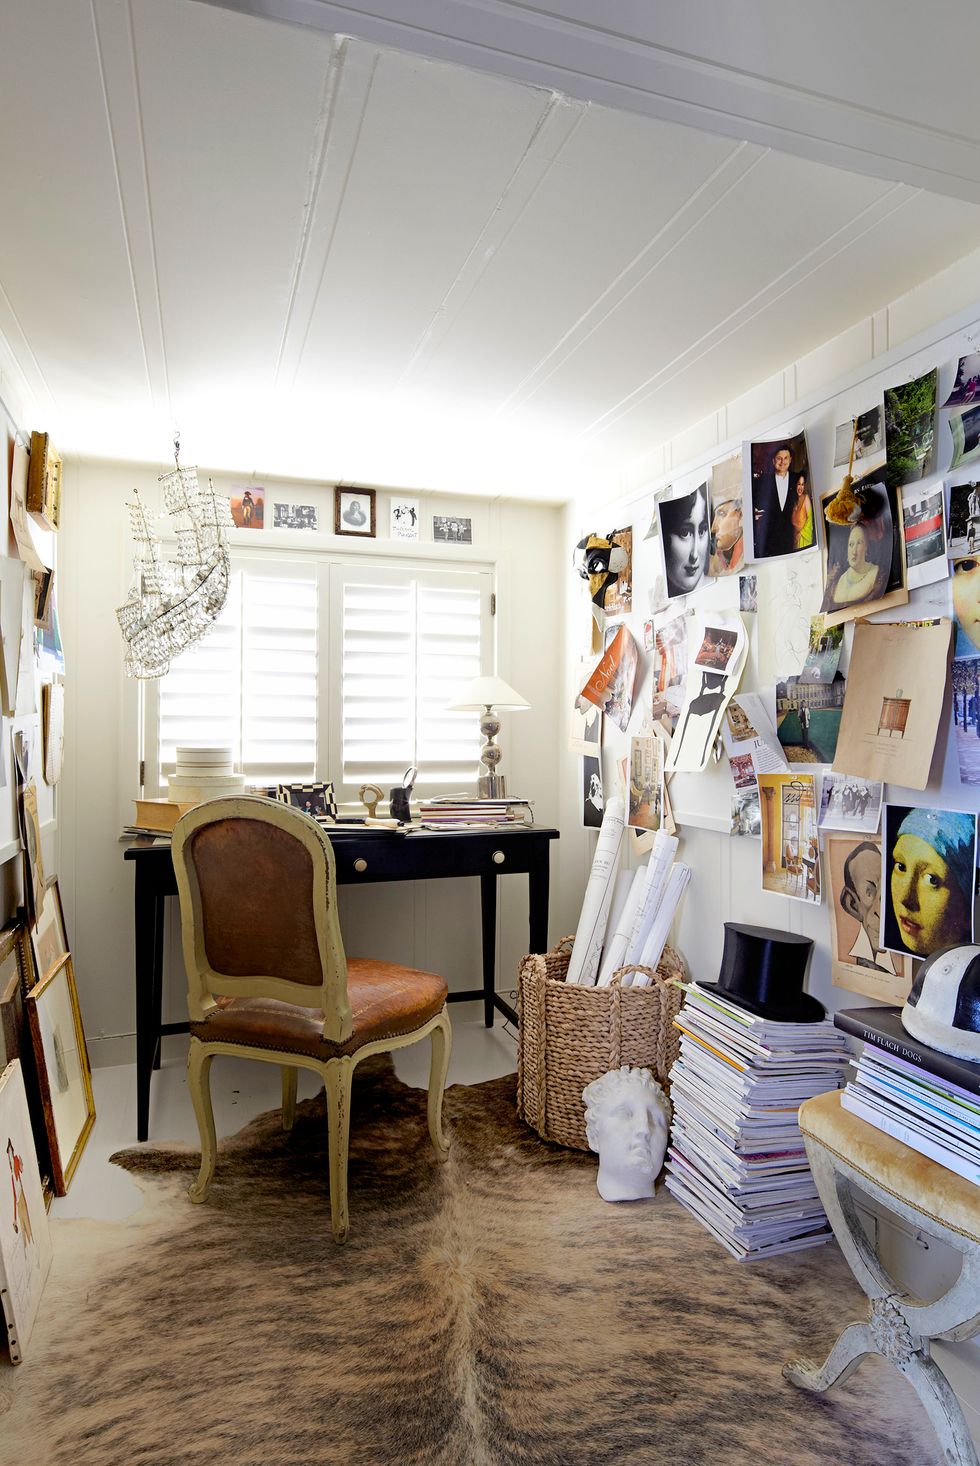 30 Products Ideas To Revamp Your Work From Home Office